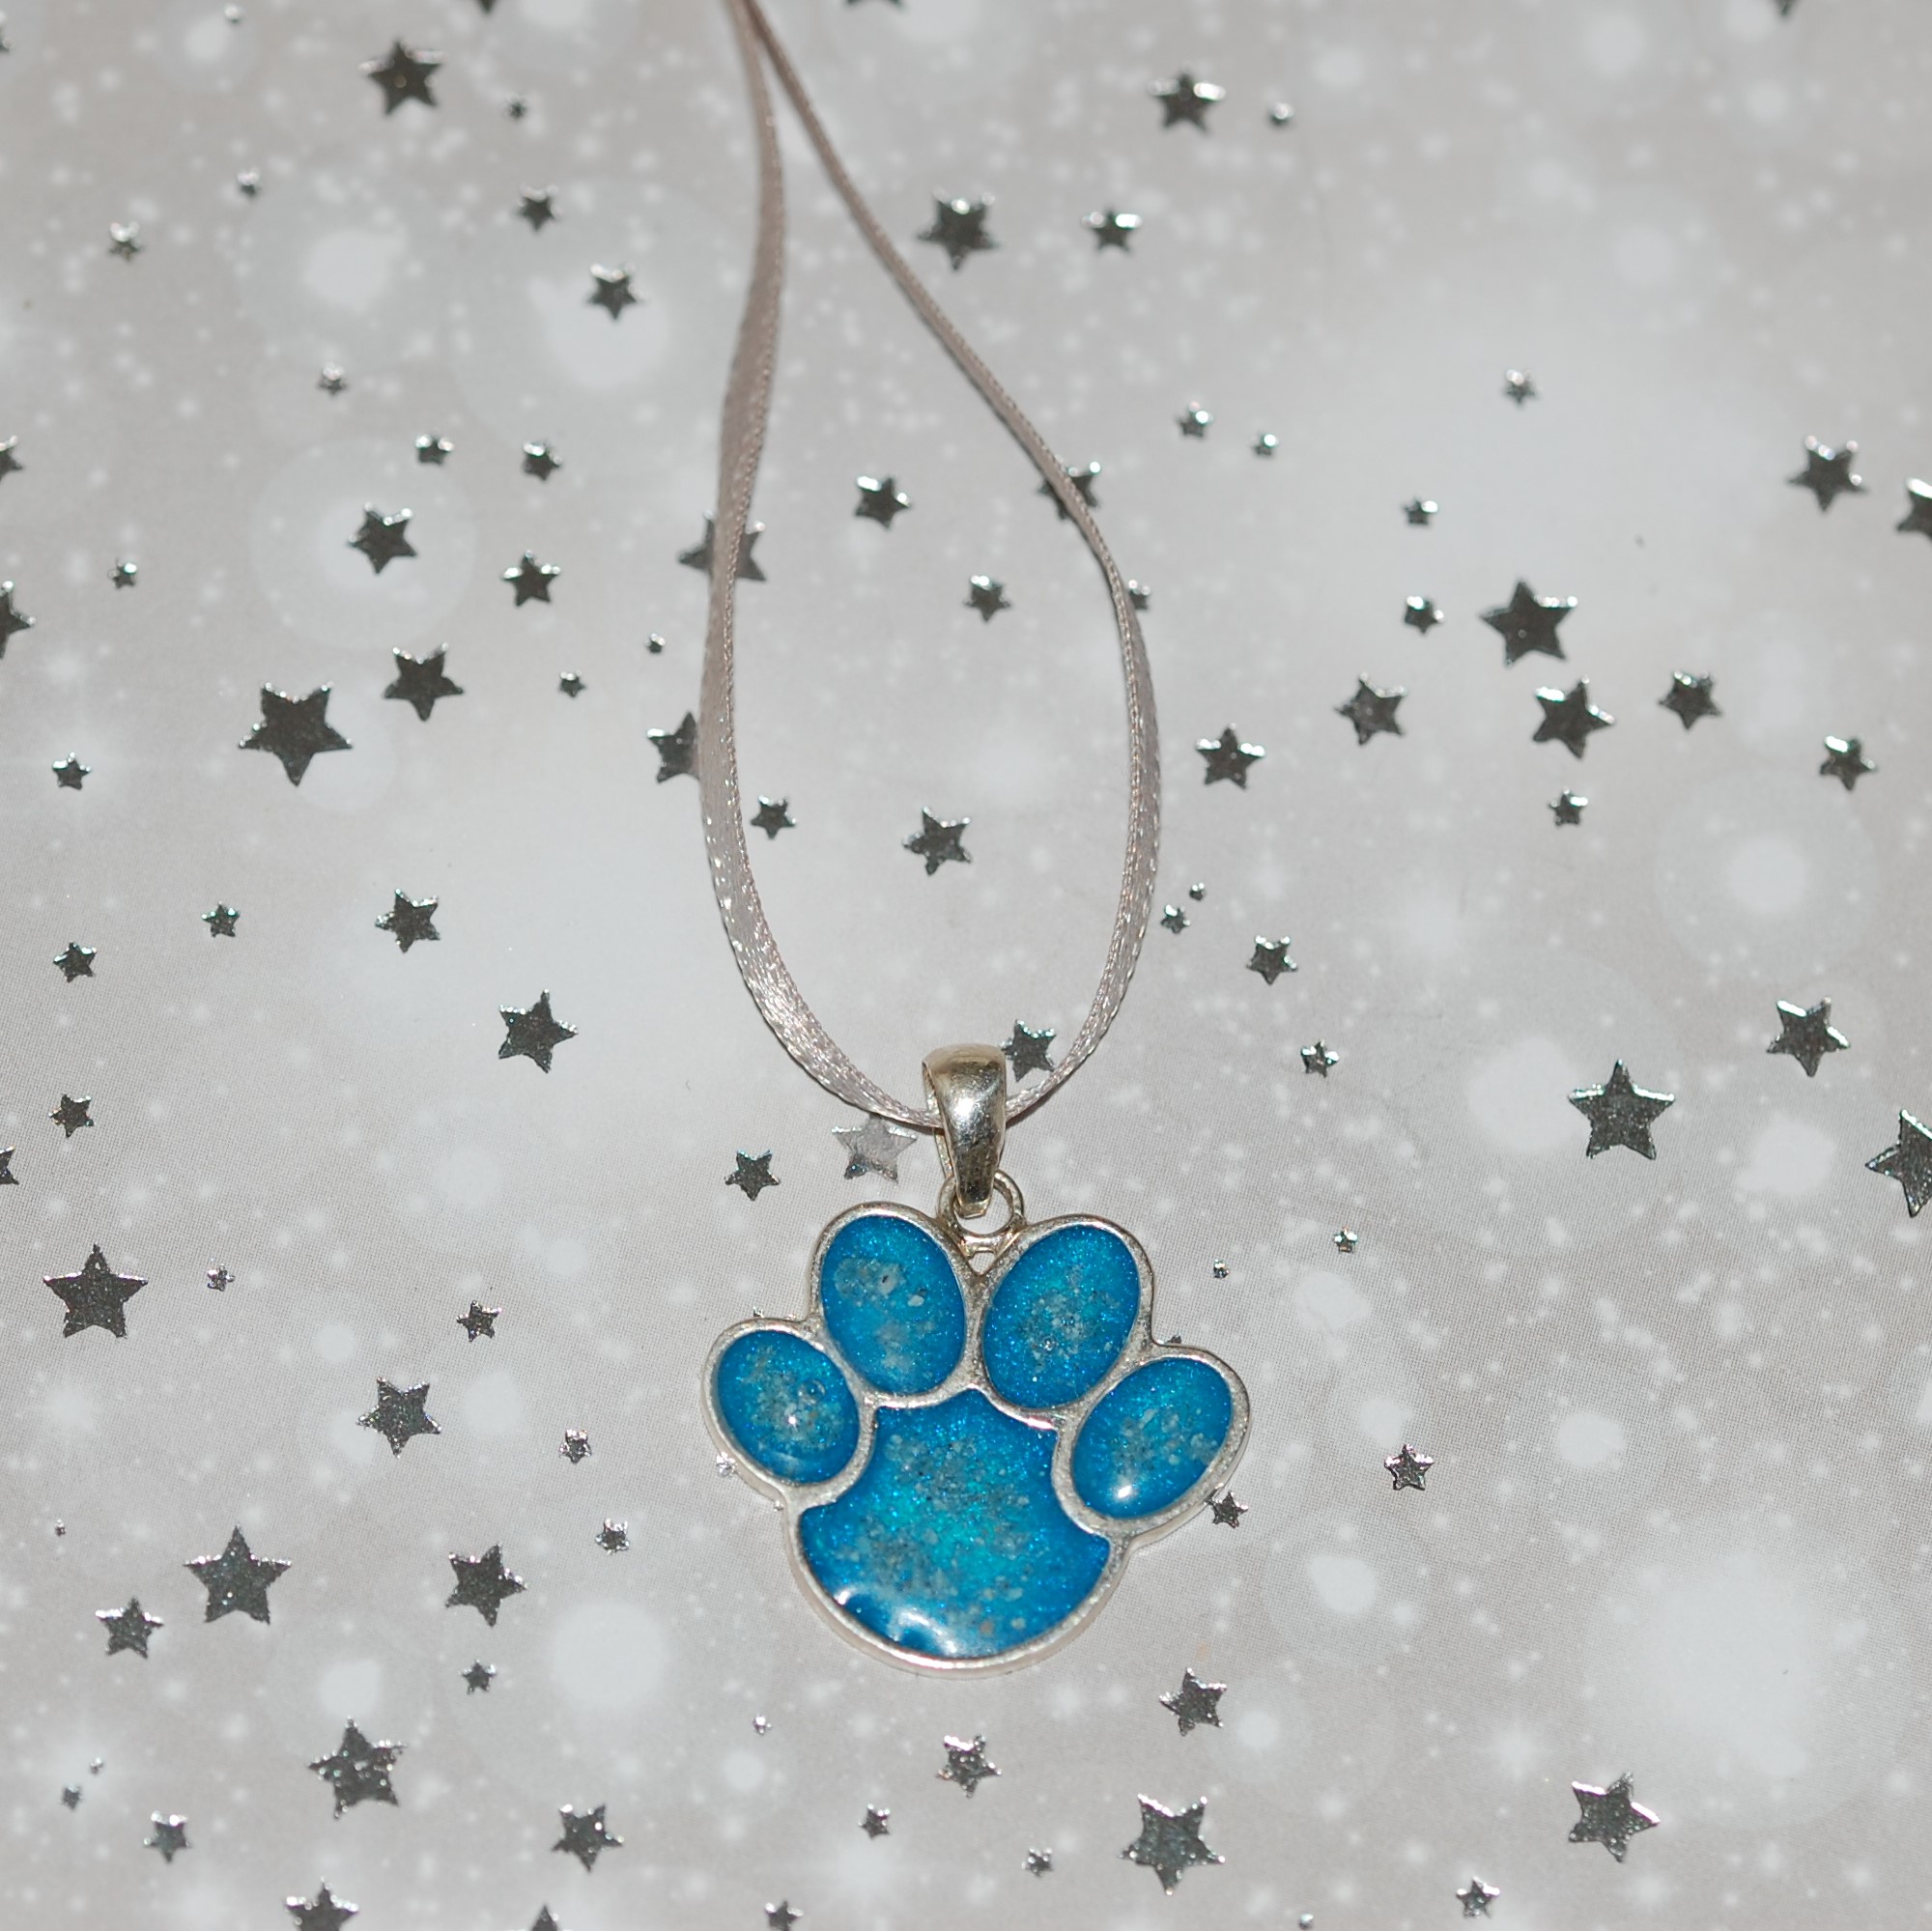 Paw print shaped personalised Christmas decoration with pet cremation ashes